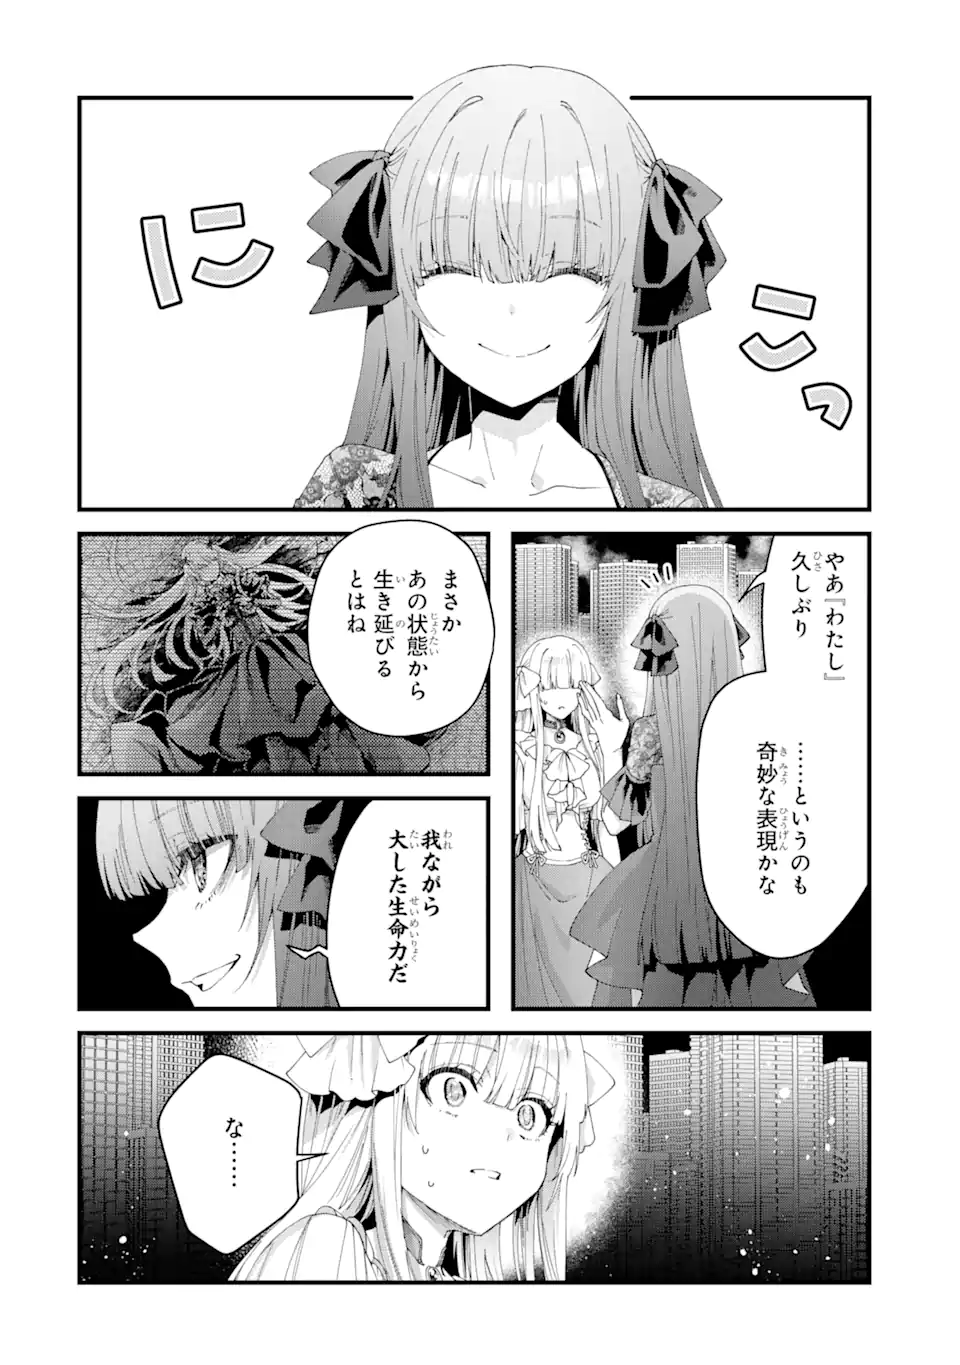 Ousama no Propose - Chapter 12.3 - Page 1